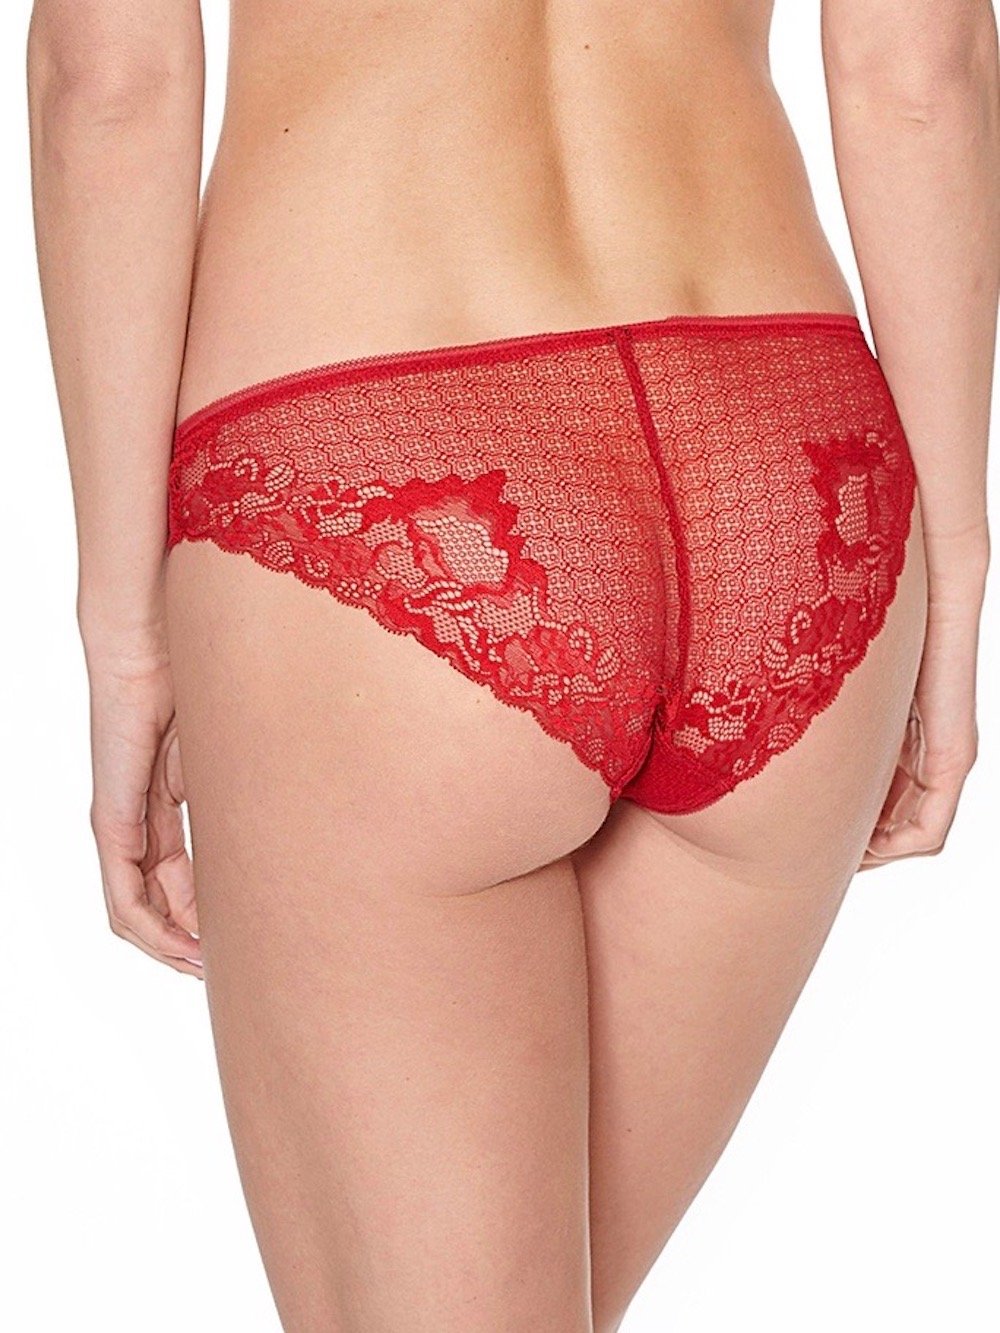 Addiction Nouvelle Lingerie Panties S / Red Addiction Too Hot To Handle Bikini Panties